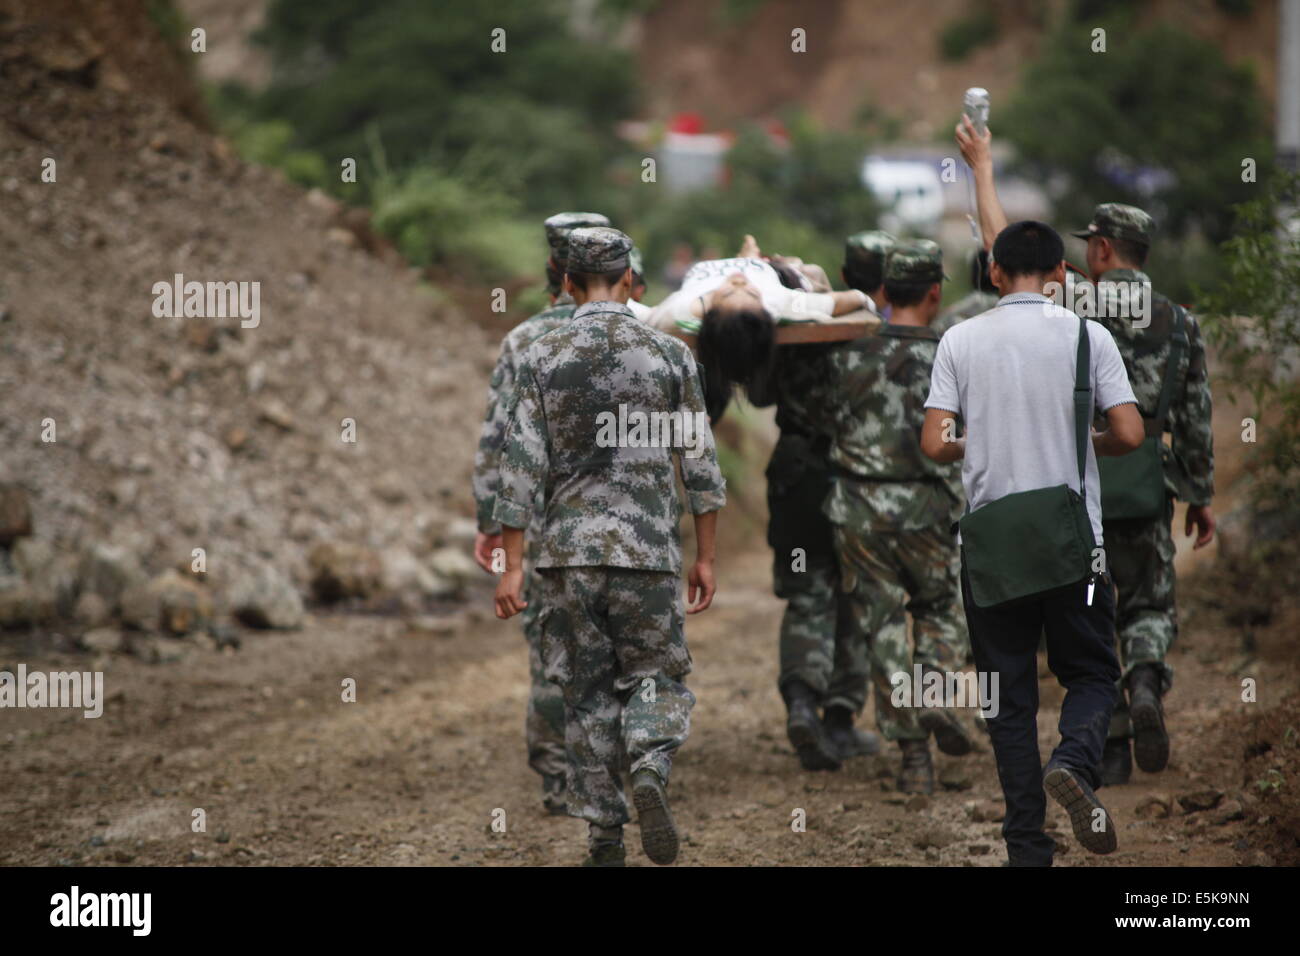 Zhaotong. 3rd Aug, 2014. Rescuers transport an injured woman after an earthquake in Ludian County of Zhaotong City in southwest China's Yunnan Province, Aug. 3, 2014. A 6.5-magnitude earthquake jolted Ludian County at 4:30 p.m. Sunday (Beijing Time), said the China Earthquake Networks Center (CENC). The Ministry of Civil Affairs has reported that the updated number of casualty is 175 dead and 181 missing. Credit:  Zhang Guangyu/Xinhua/Alamy Live News Stock Photo